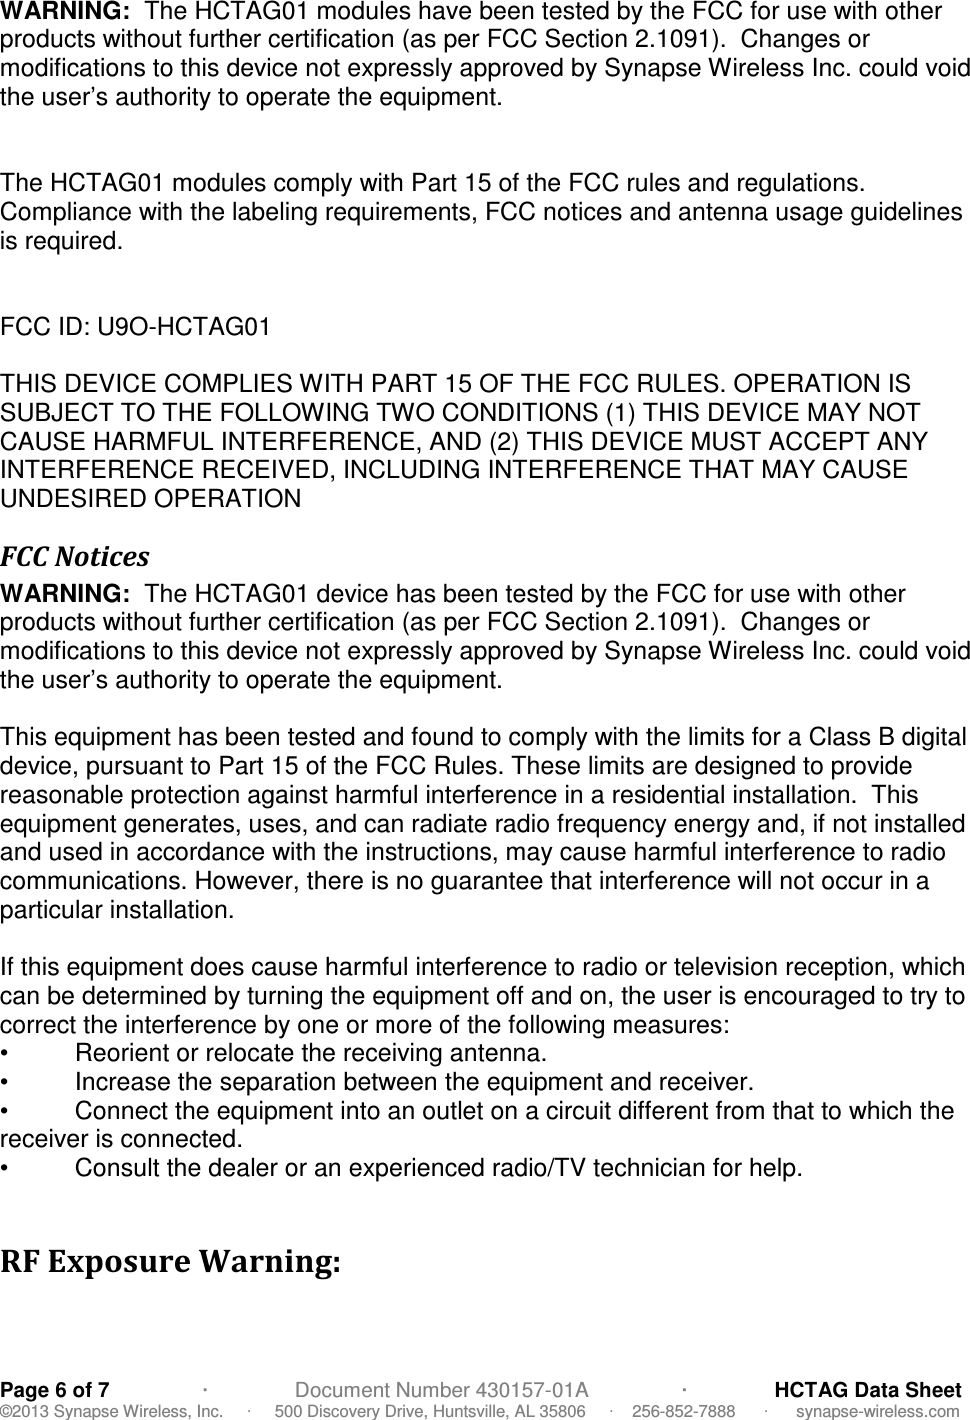   Page 6 of 7                ·               Document Number 430157-01A                ·               HCTAG Data Sheet ©2013 Synapse Wireless, Inc.     ·     500 Discovery Drive, Huntsville, AL 35806     ·    256-852-7888      ·      synapse-wireless.com WARNING:  The HCTAG01 modules have been tested by the FCC for use with other products without further certification (as per FCC Section 2.1091).  Changes or modifications to this device not expressly approved by Synapse Wireless Inc. could void the user’s authority to operate the equipment.   The HCTAG01 modules comply with Part 15 of the FCC rules and regulations.  Compliance with the labeling requirements, FCC notices and antenna usage guidelines is required.     FCC ID: U9O-HCTAG01  THIS DEVICE COMPLIES WITH PART 15 OF THE FCC RULES. OPERATION IS SUBJECT TO THE FOLLOWING TWO CONDITIONS (1) THIS DEVICE MAY NOT CAUSE HARMFUL INTERFERENCE, AND (2) THIS DEVICE MUST ACCEPT ANY INTERFERENCE RECEIVED, INCLUDING INTERFERENCE THAT MAY CAUSE UNDESIRED OPERATION FCC Notices WARNING:  The HCTAG01 device has been tested by the FCC for use with other products without further certification (as per FCC Section 2.1091).  Changes or modifications to this device not expressly approved by Synapse Wireless Inc. could void the user’s authority to operate the equipment.  This equipment has been tested and found to comply with the limits for a Class B digital device, pursuant to Part 15 of the FCC Rules. These limits are designed to provide reasonable protection against harmful interference in a residential installation.  This equipment generates, uses, and can radiate radio frequency energy and, if not installed and used in accordance with the instructions, may cause harmful interference to radio communications. However, there is no guarantee that interference will not occur in a particular installation.   If this equipment does cause harmful interference to radio or television reception, which can be determined by turning the equipment off and on, the user is encouraged to try to correct the interference by one or more of the following measures: •   Reorient or relocate the receiving antenna. •   Increase the separation between the equipment and receiver. •   Connect the equipment into an outlet on a circuit different from that to which the receiver is connected. •   Consult the dealer or an experienced radio/TV technician for help.  RF Exposure Warning:  